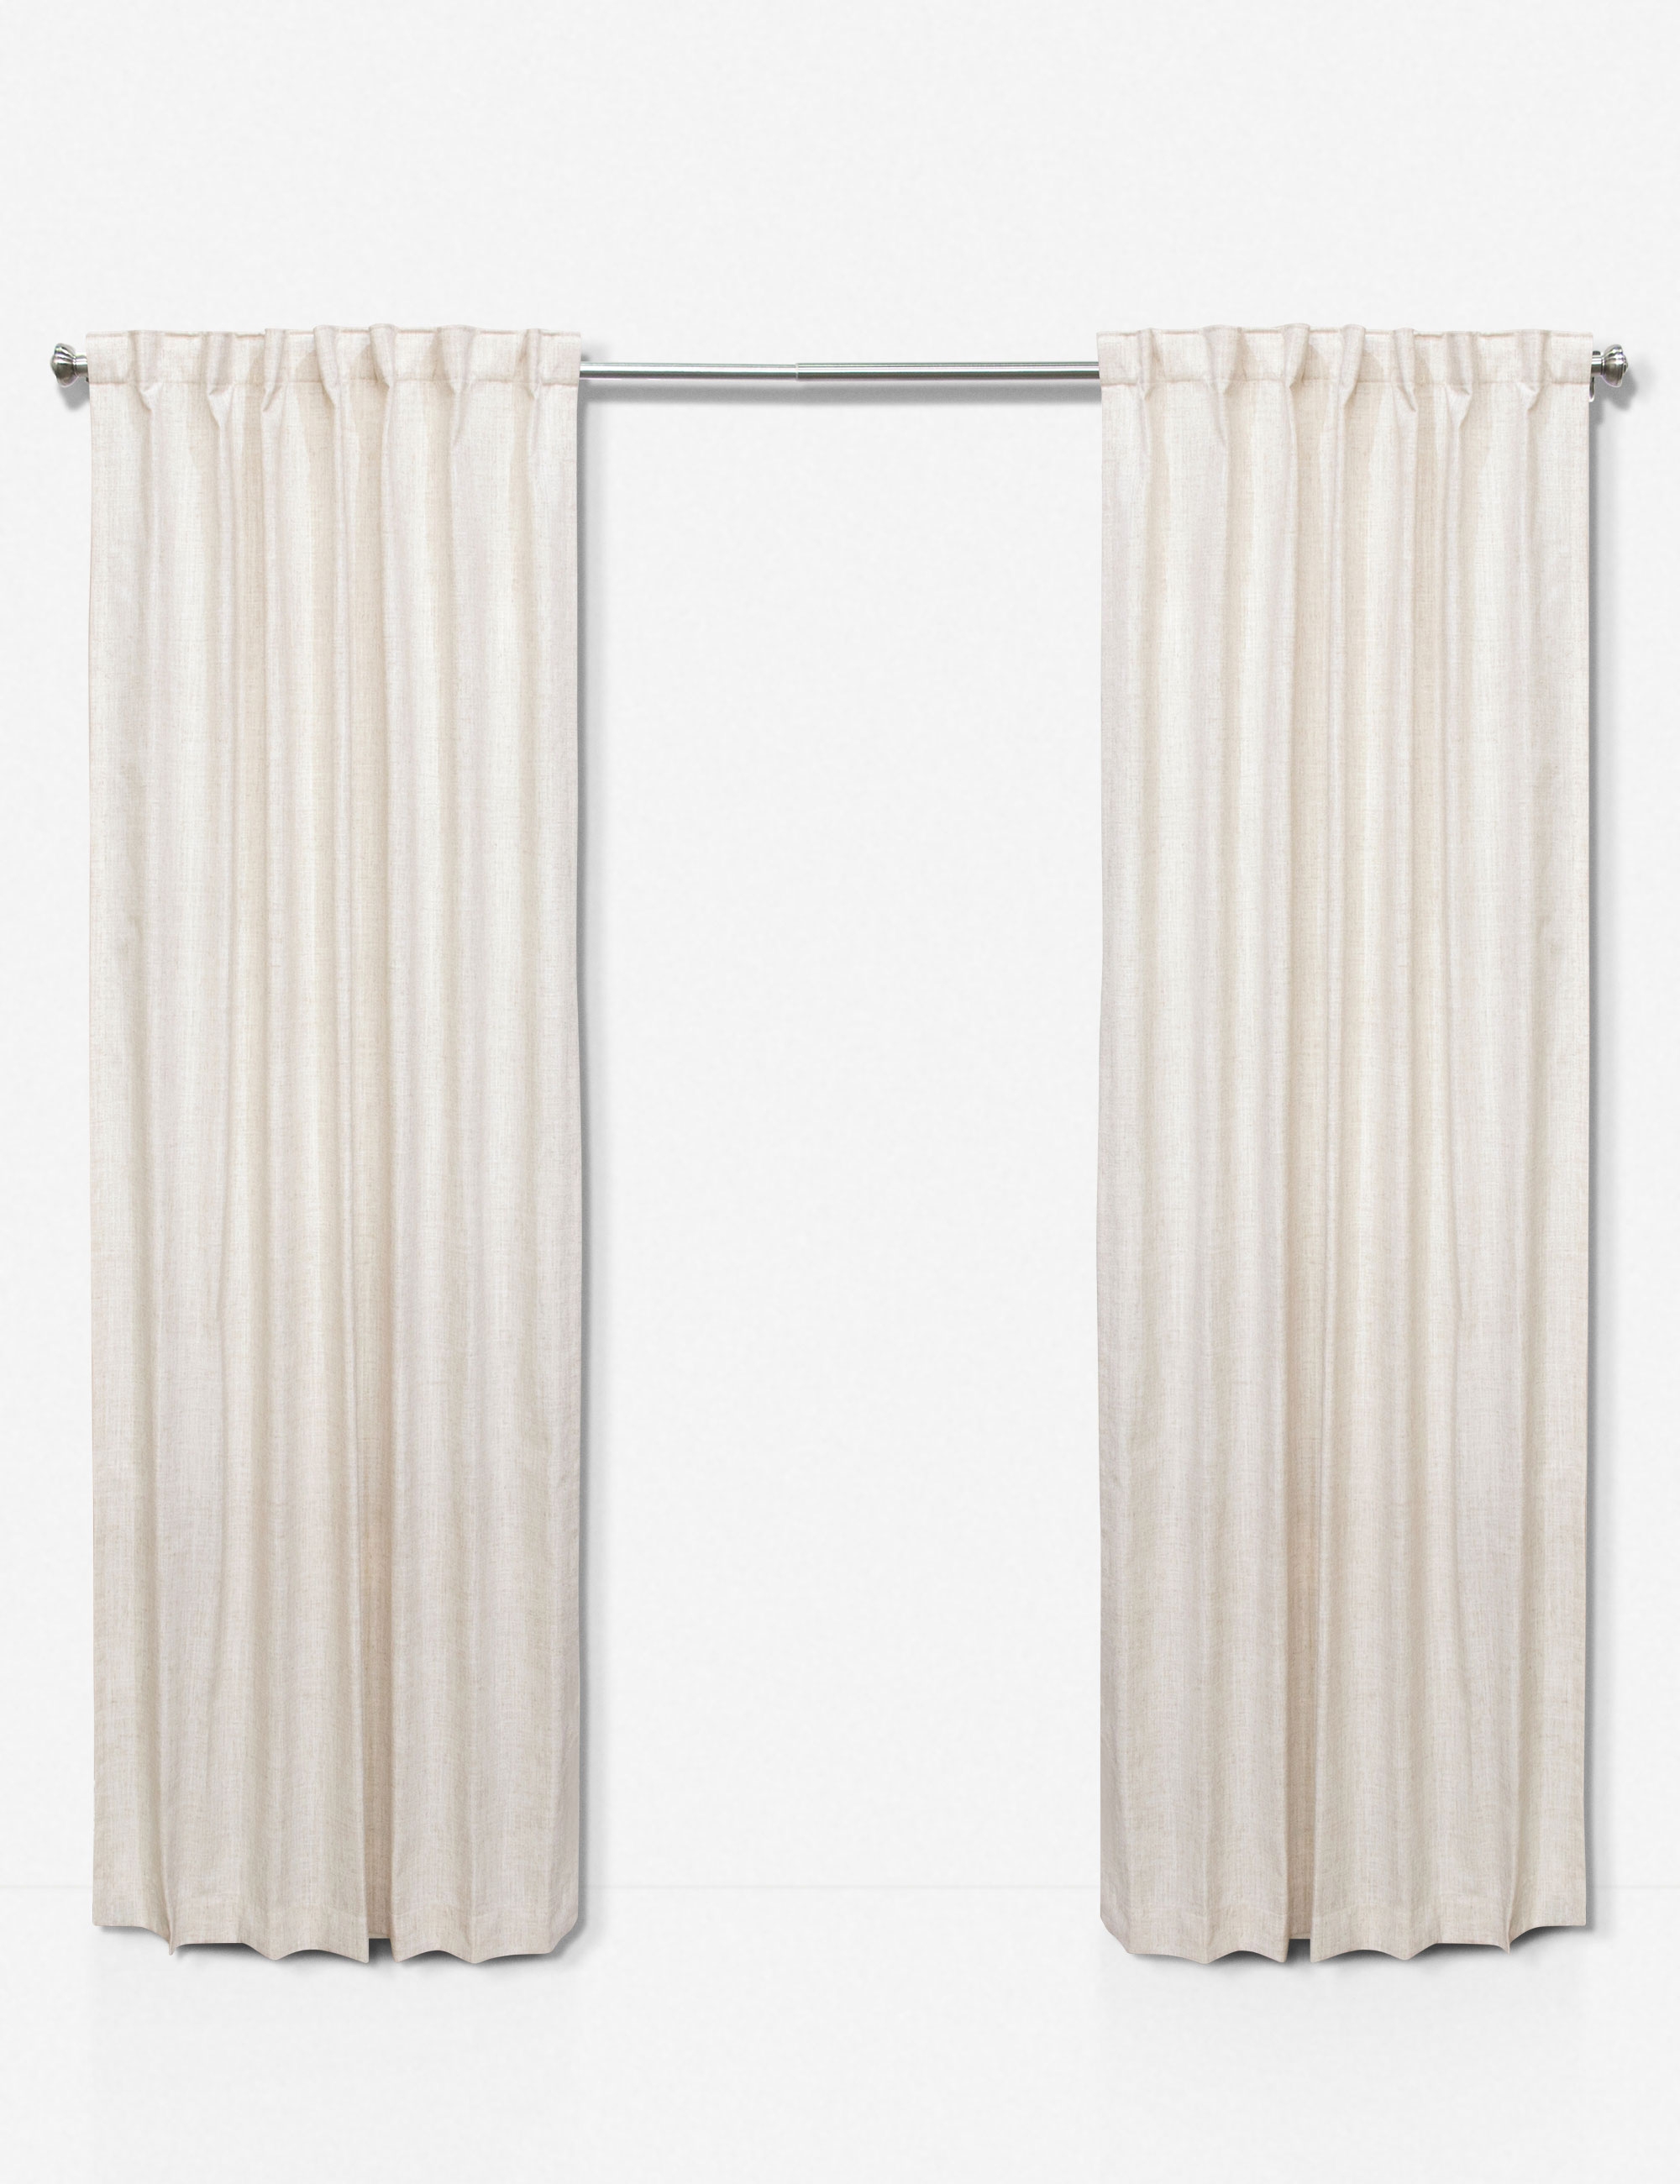 Talc Woven Curtain Panel, 120" x 50" Unlined - Image 5